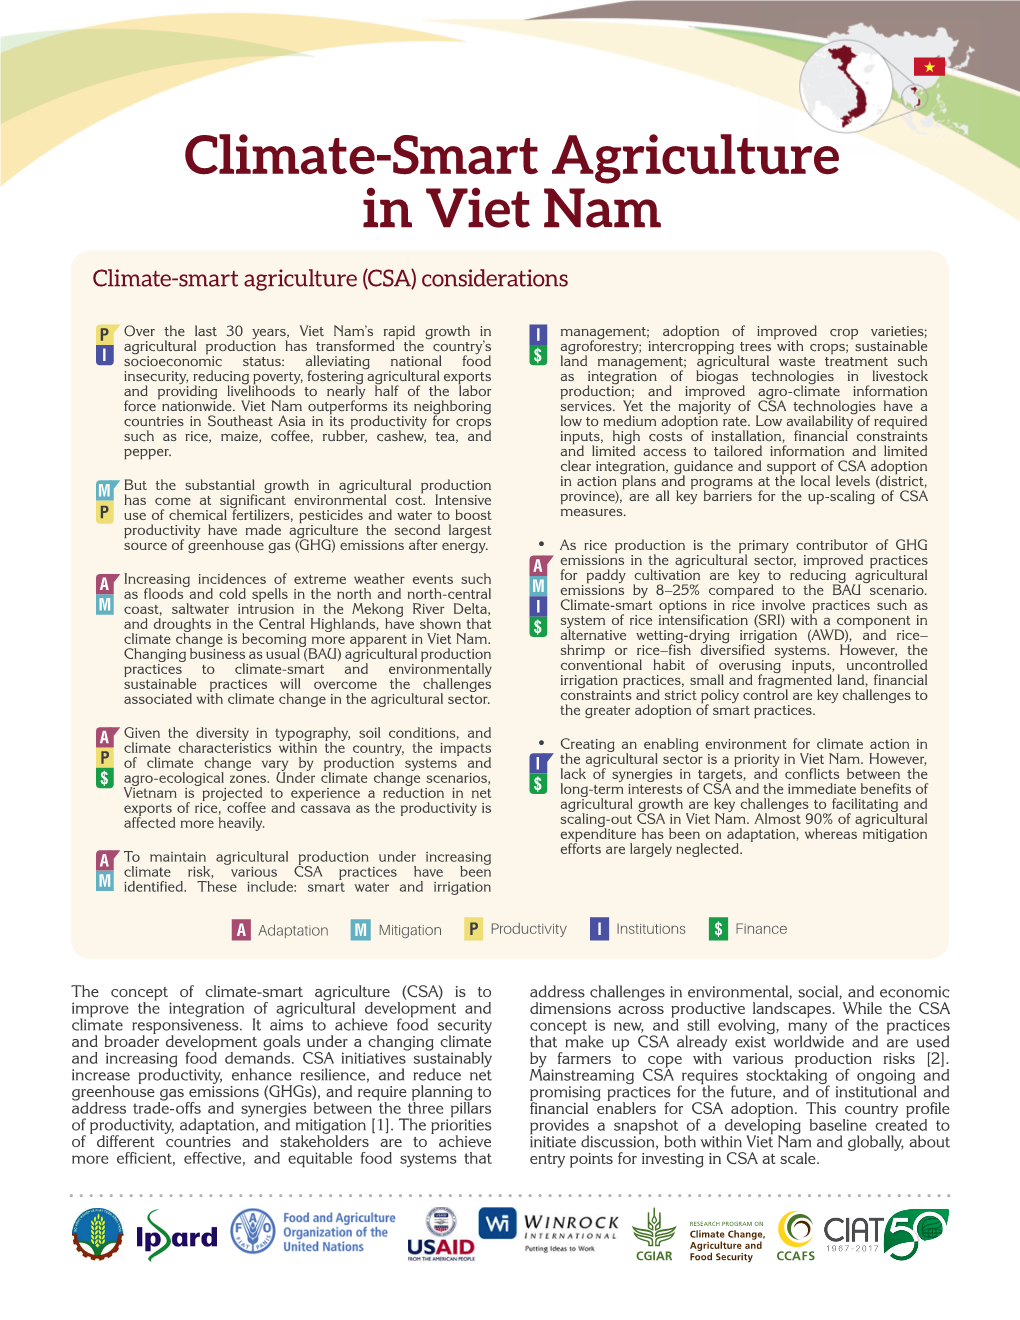 Climate-Smart Agriculture in Viet Nam